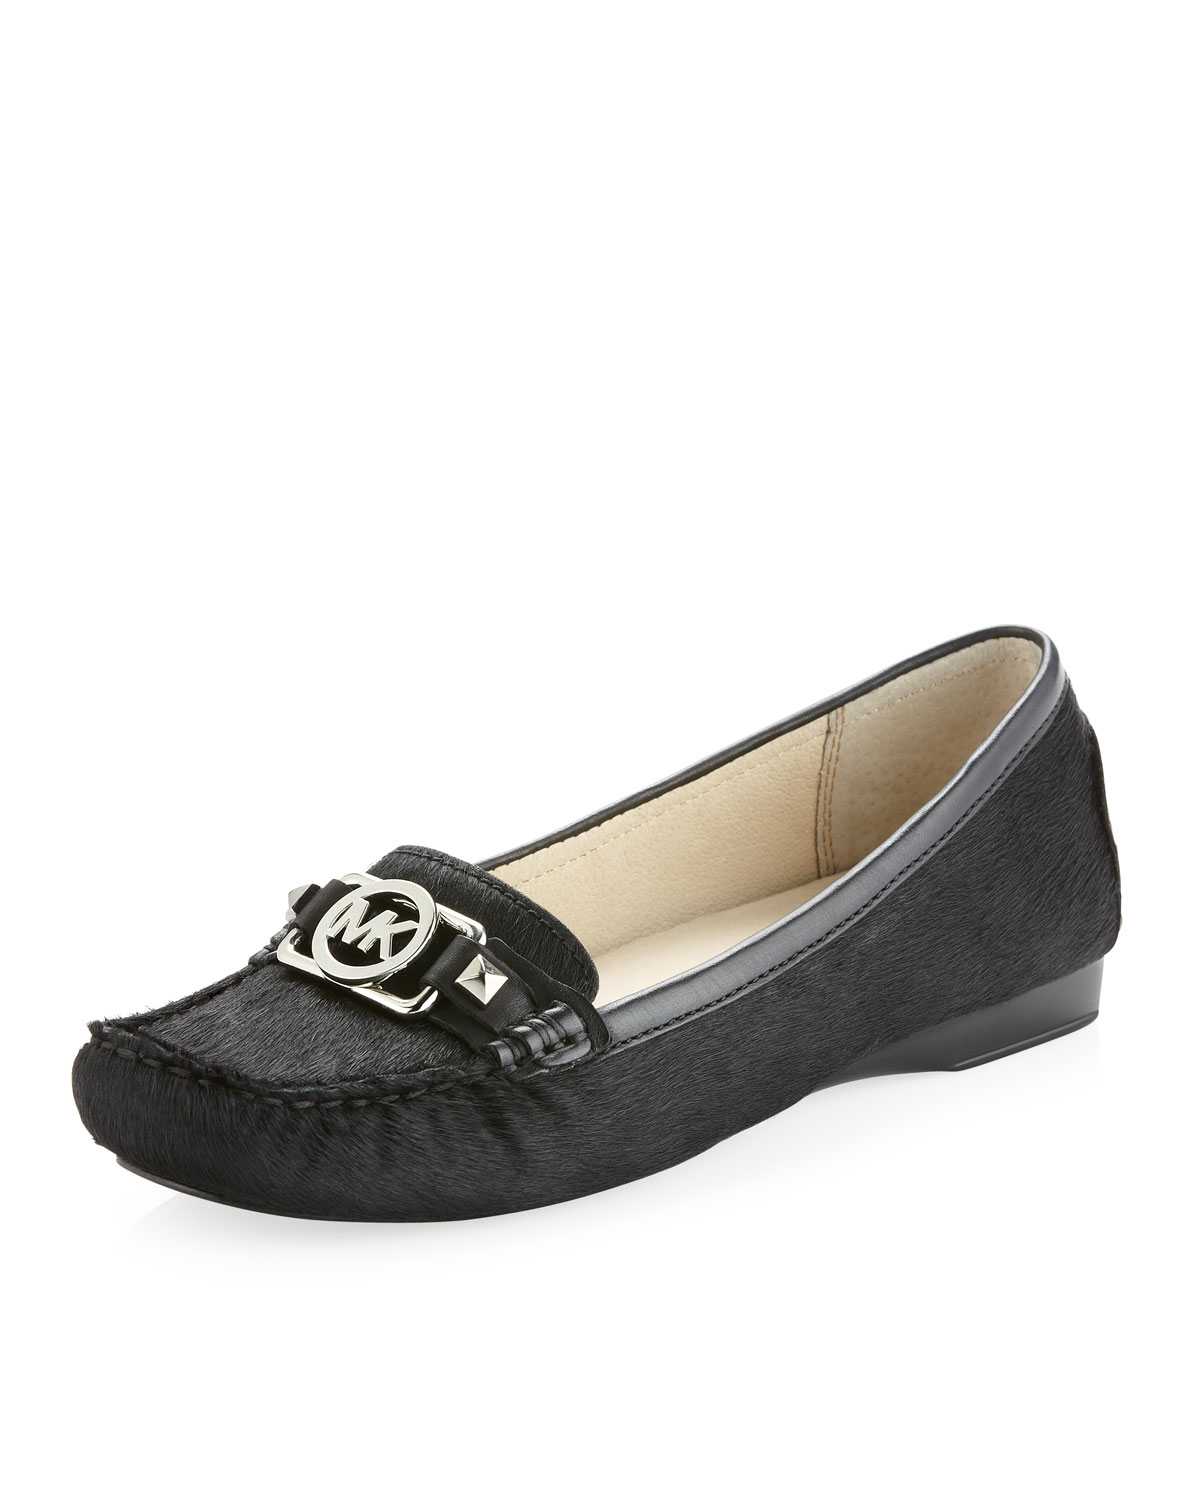 Lyst - Michael kors Charm Moccasin in Black